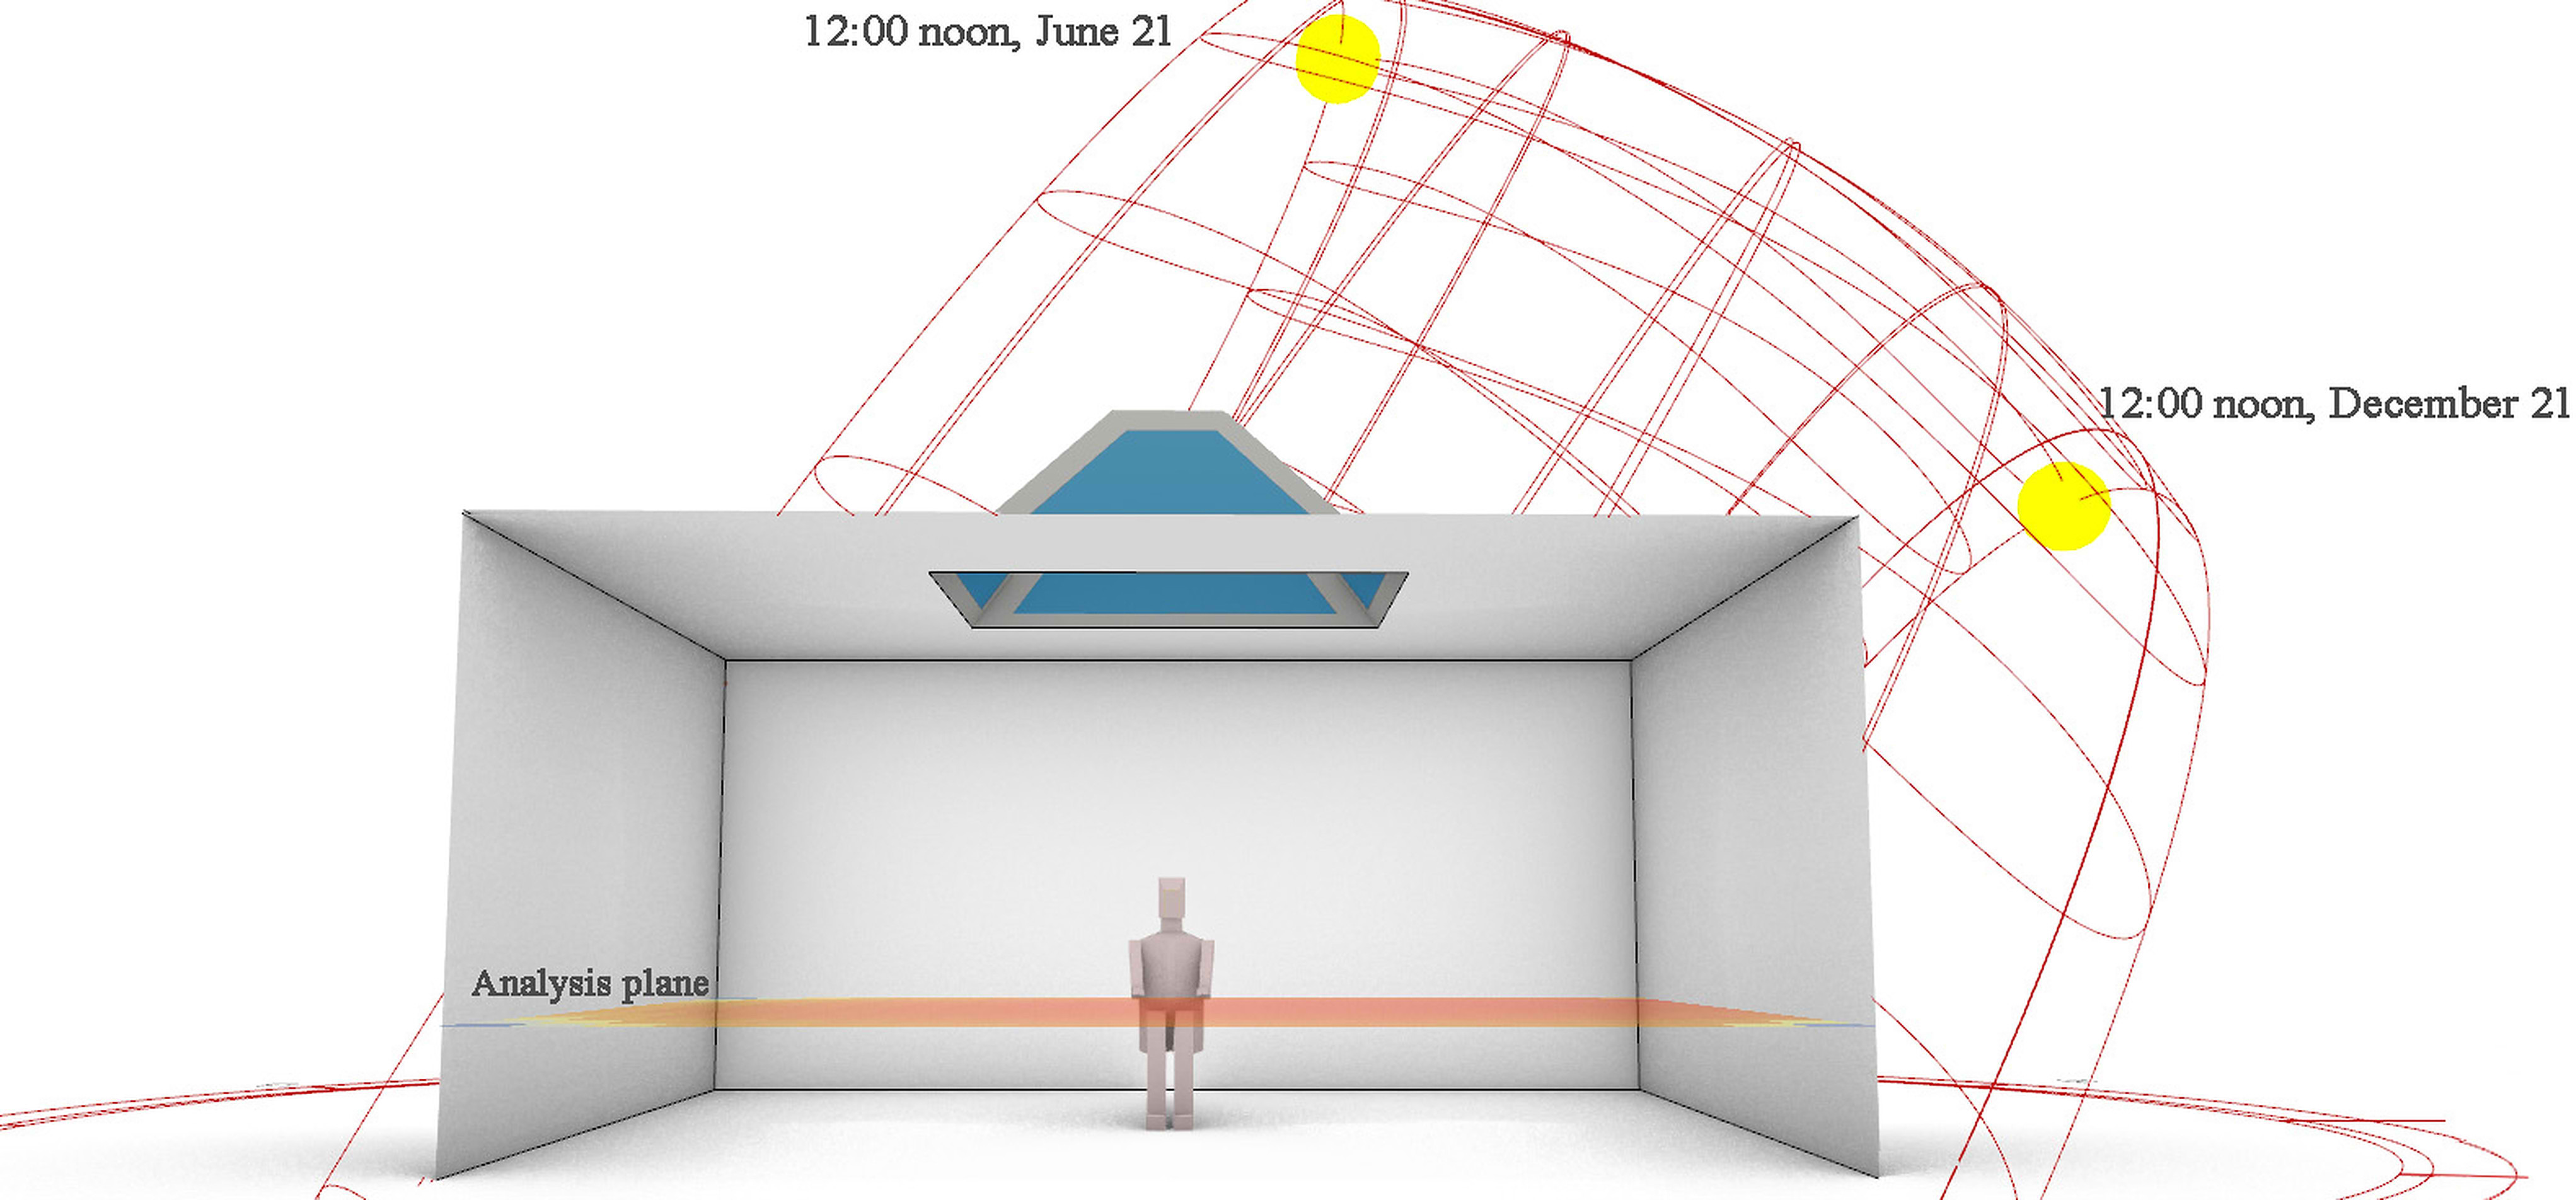 The occupant and environment's situation for glare analysis. The analysis plane is also seen for daylight analysis.